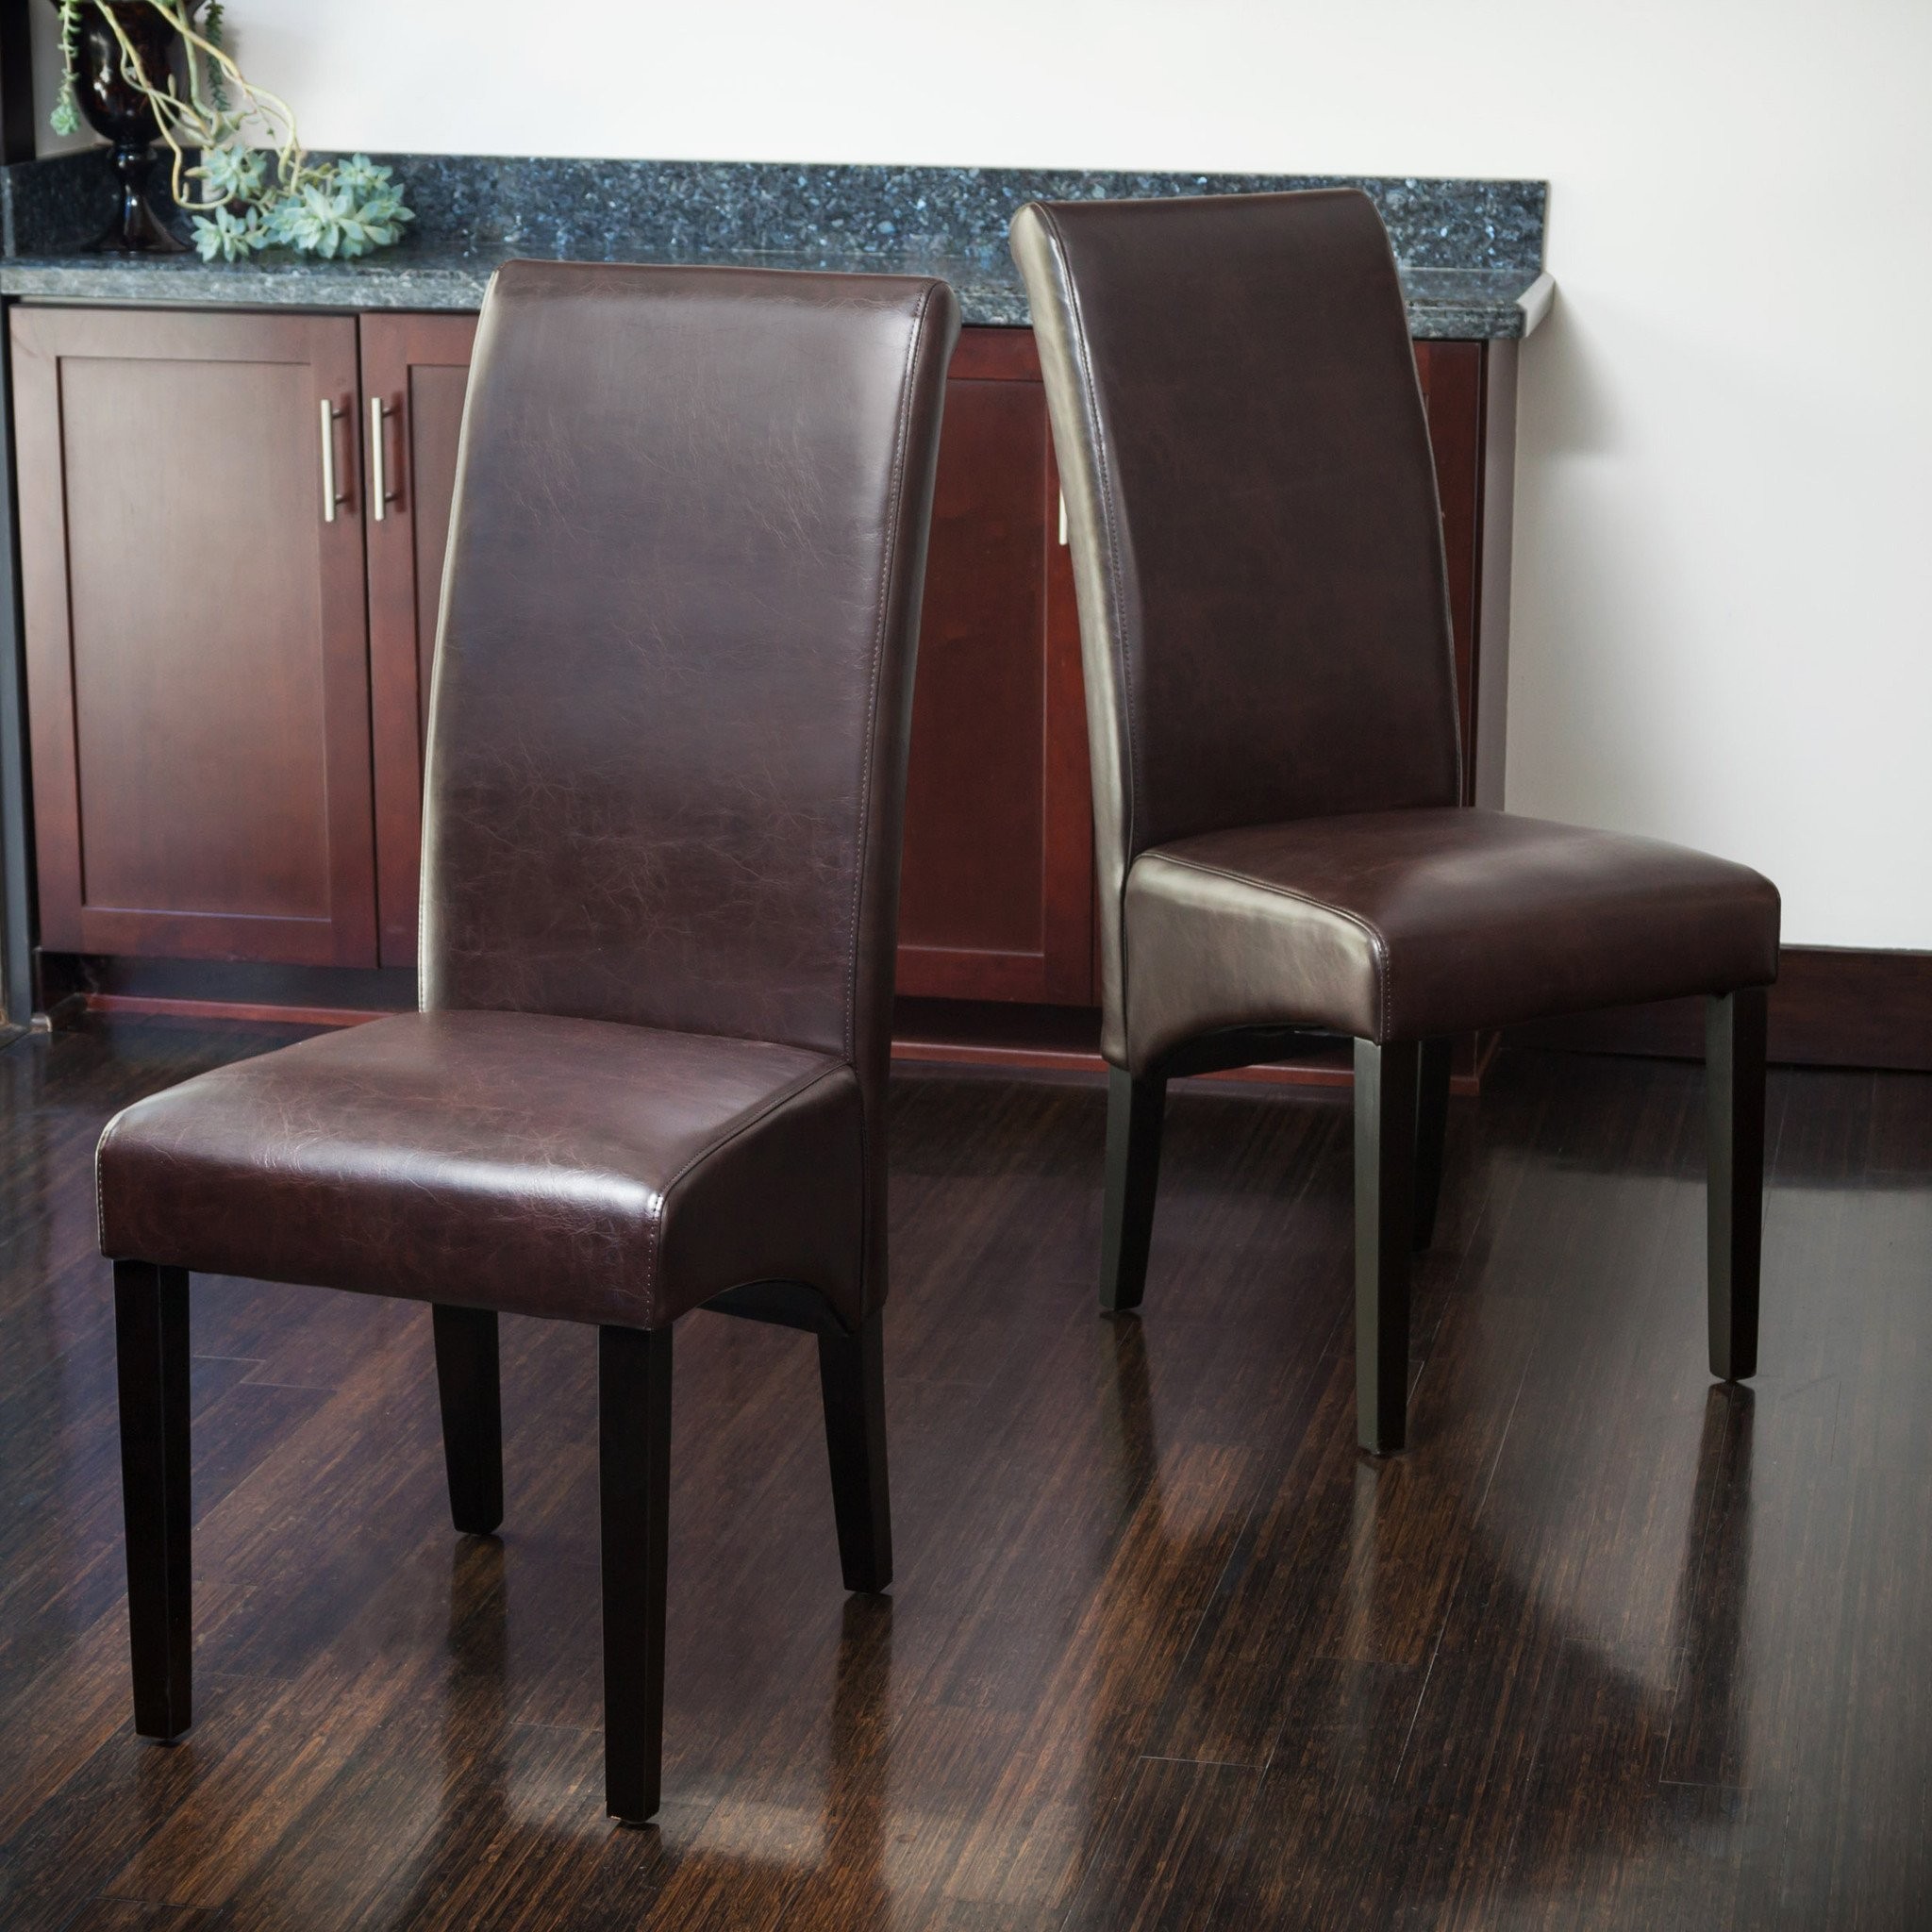 Morrow Brown Leather Dining Chairs (Set of 2)